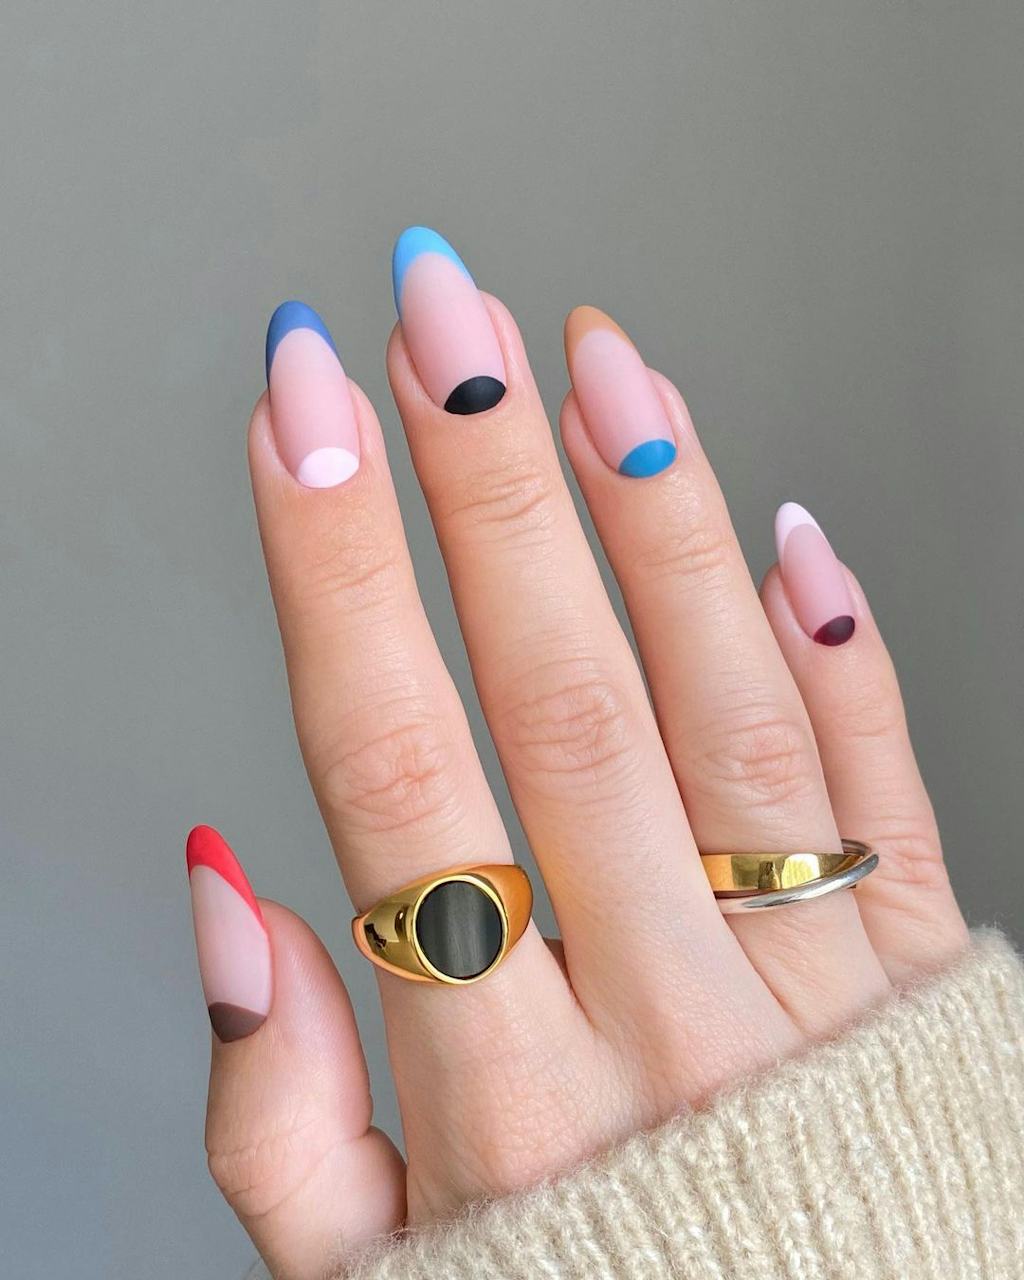 These nail trends will be huge in 2023